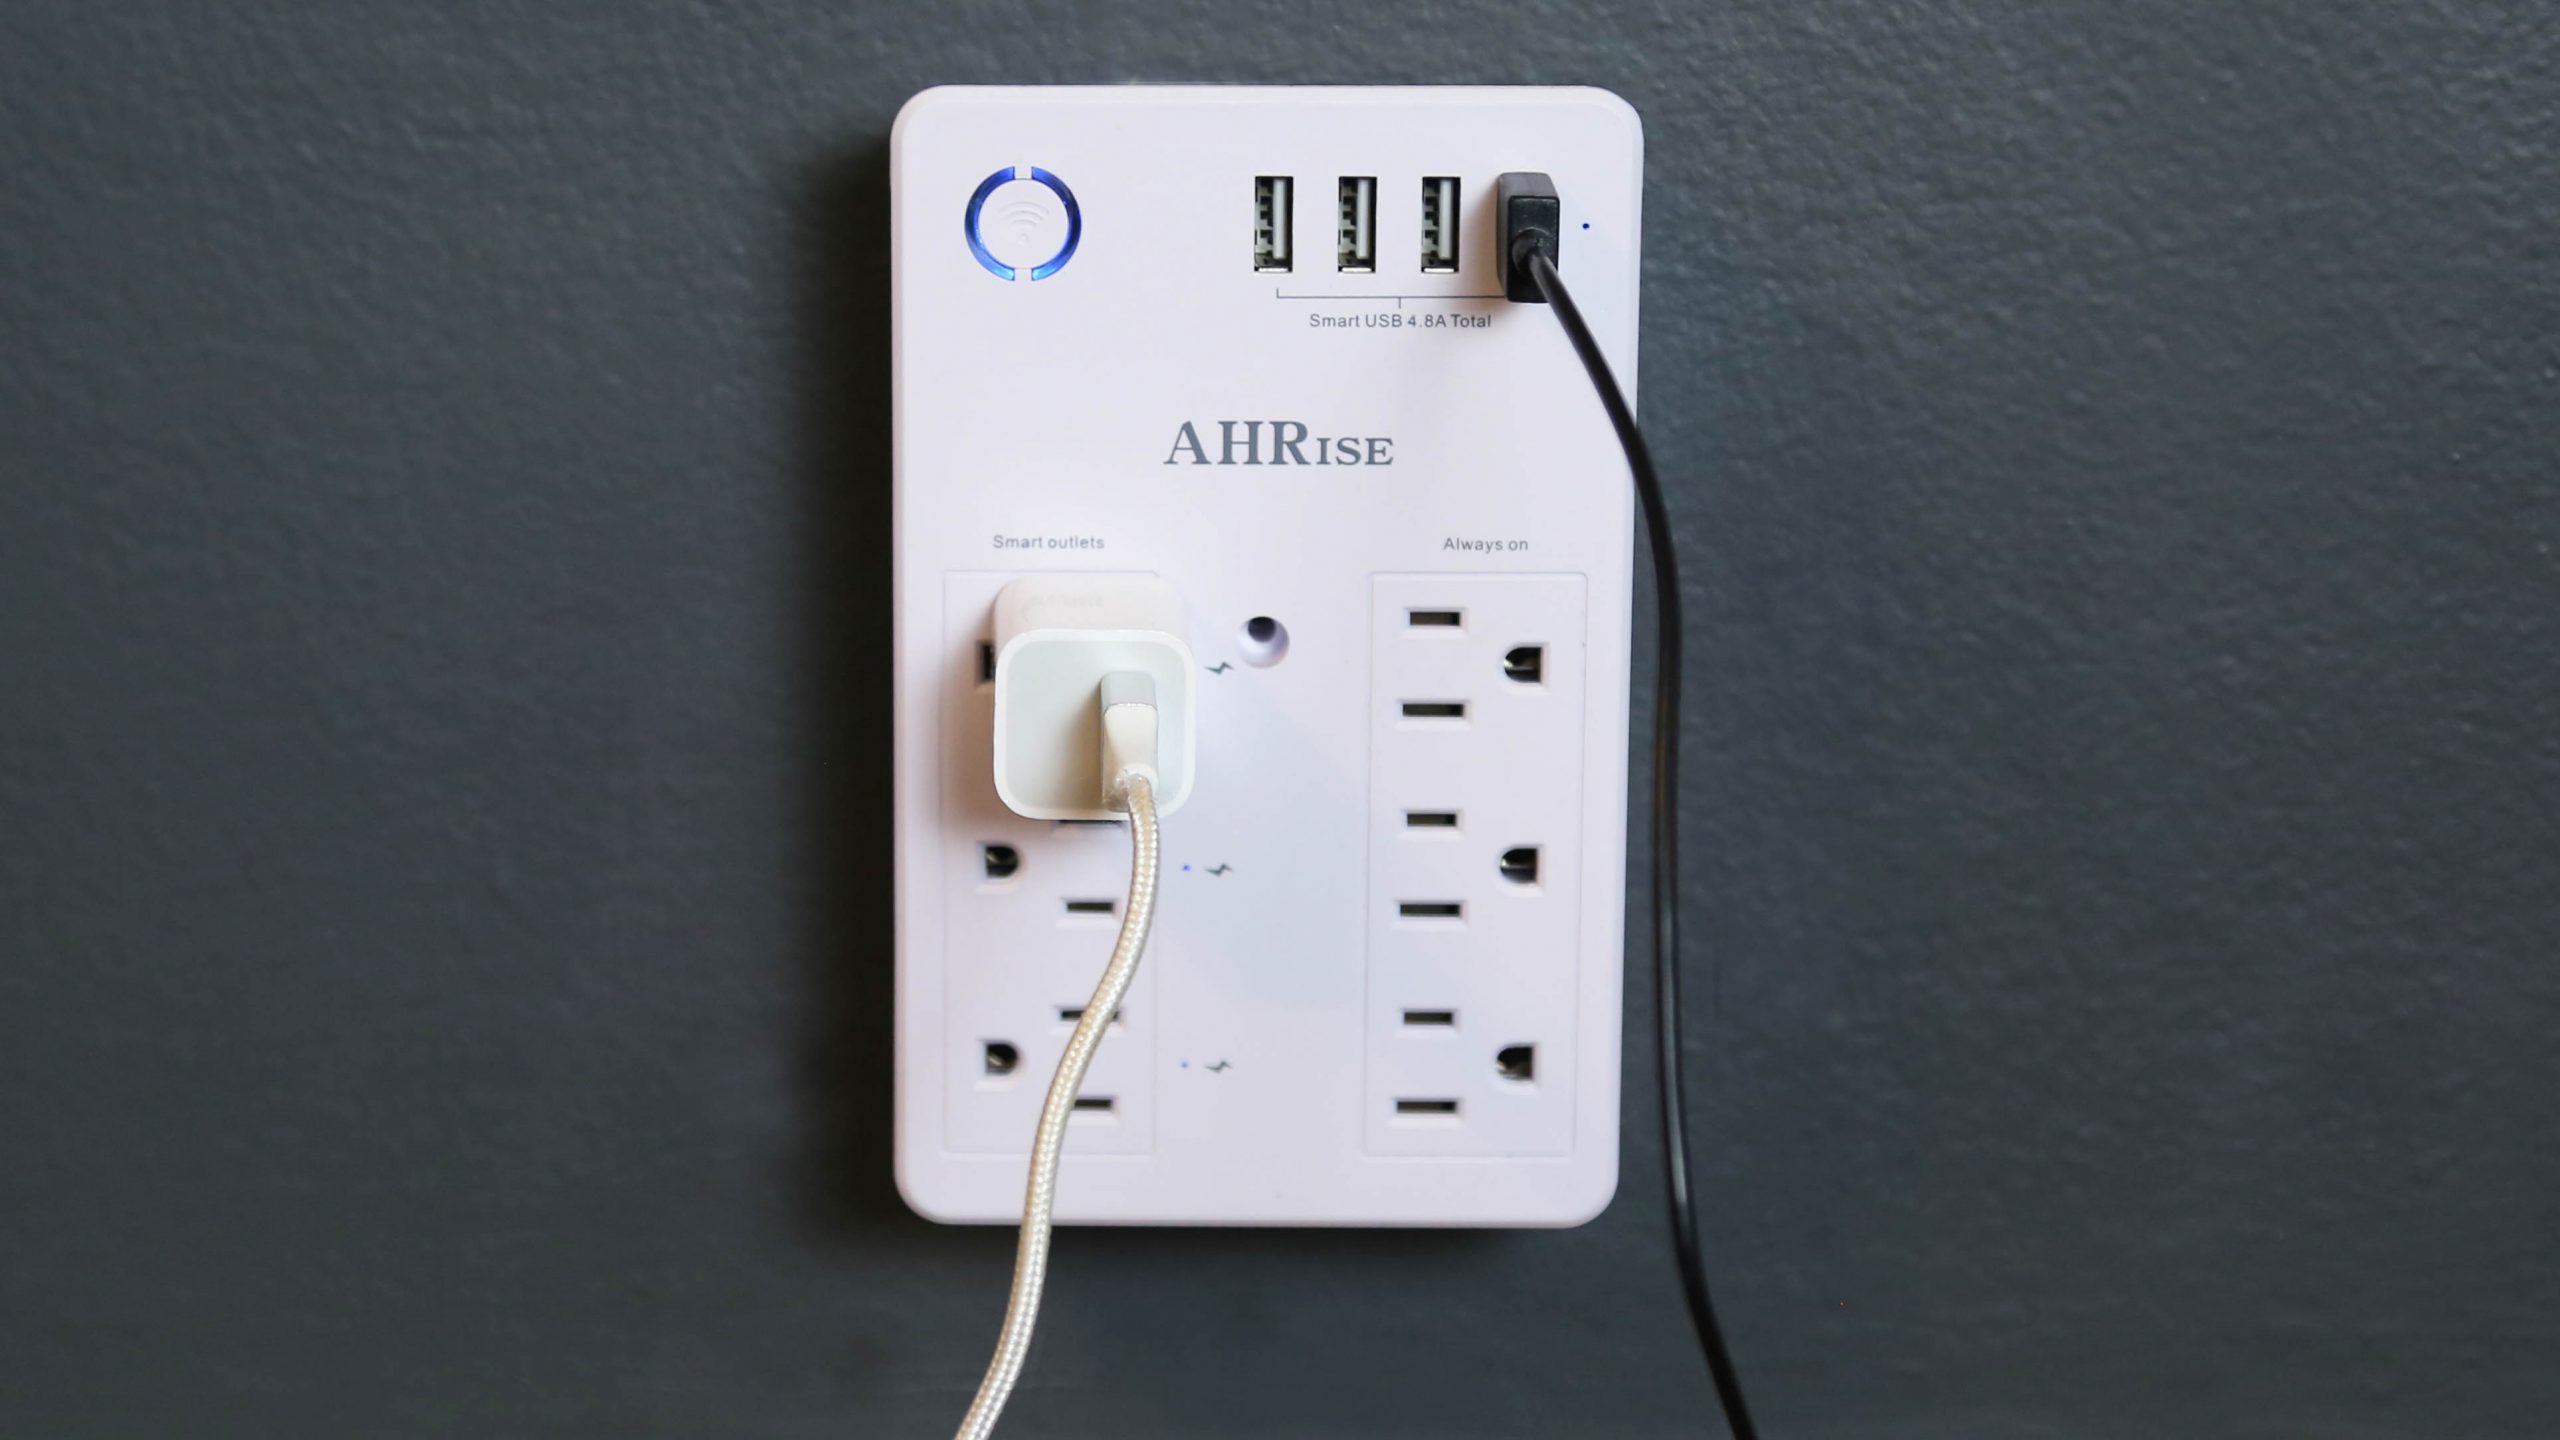 https://www.dontwasteyourmoney.com/wp-content/uploads/2020/05/smart-plug-AHRise-wifi-smart-surge-protector-action-review-ub-1-scaled.jpg